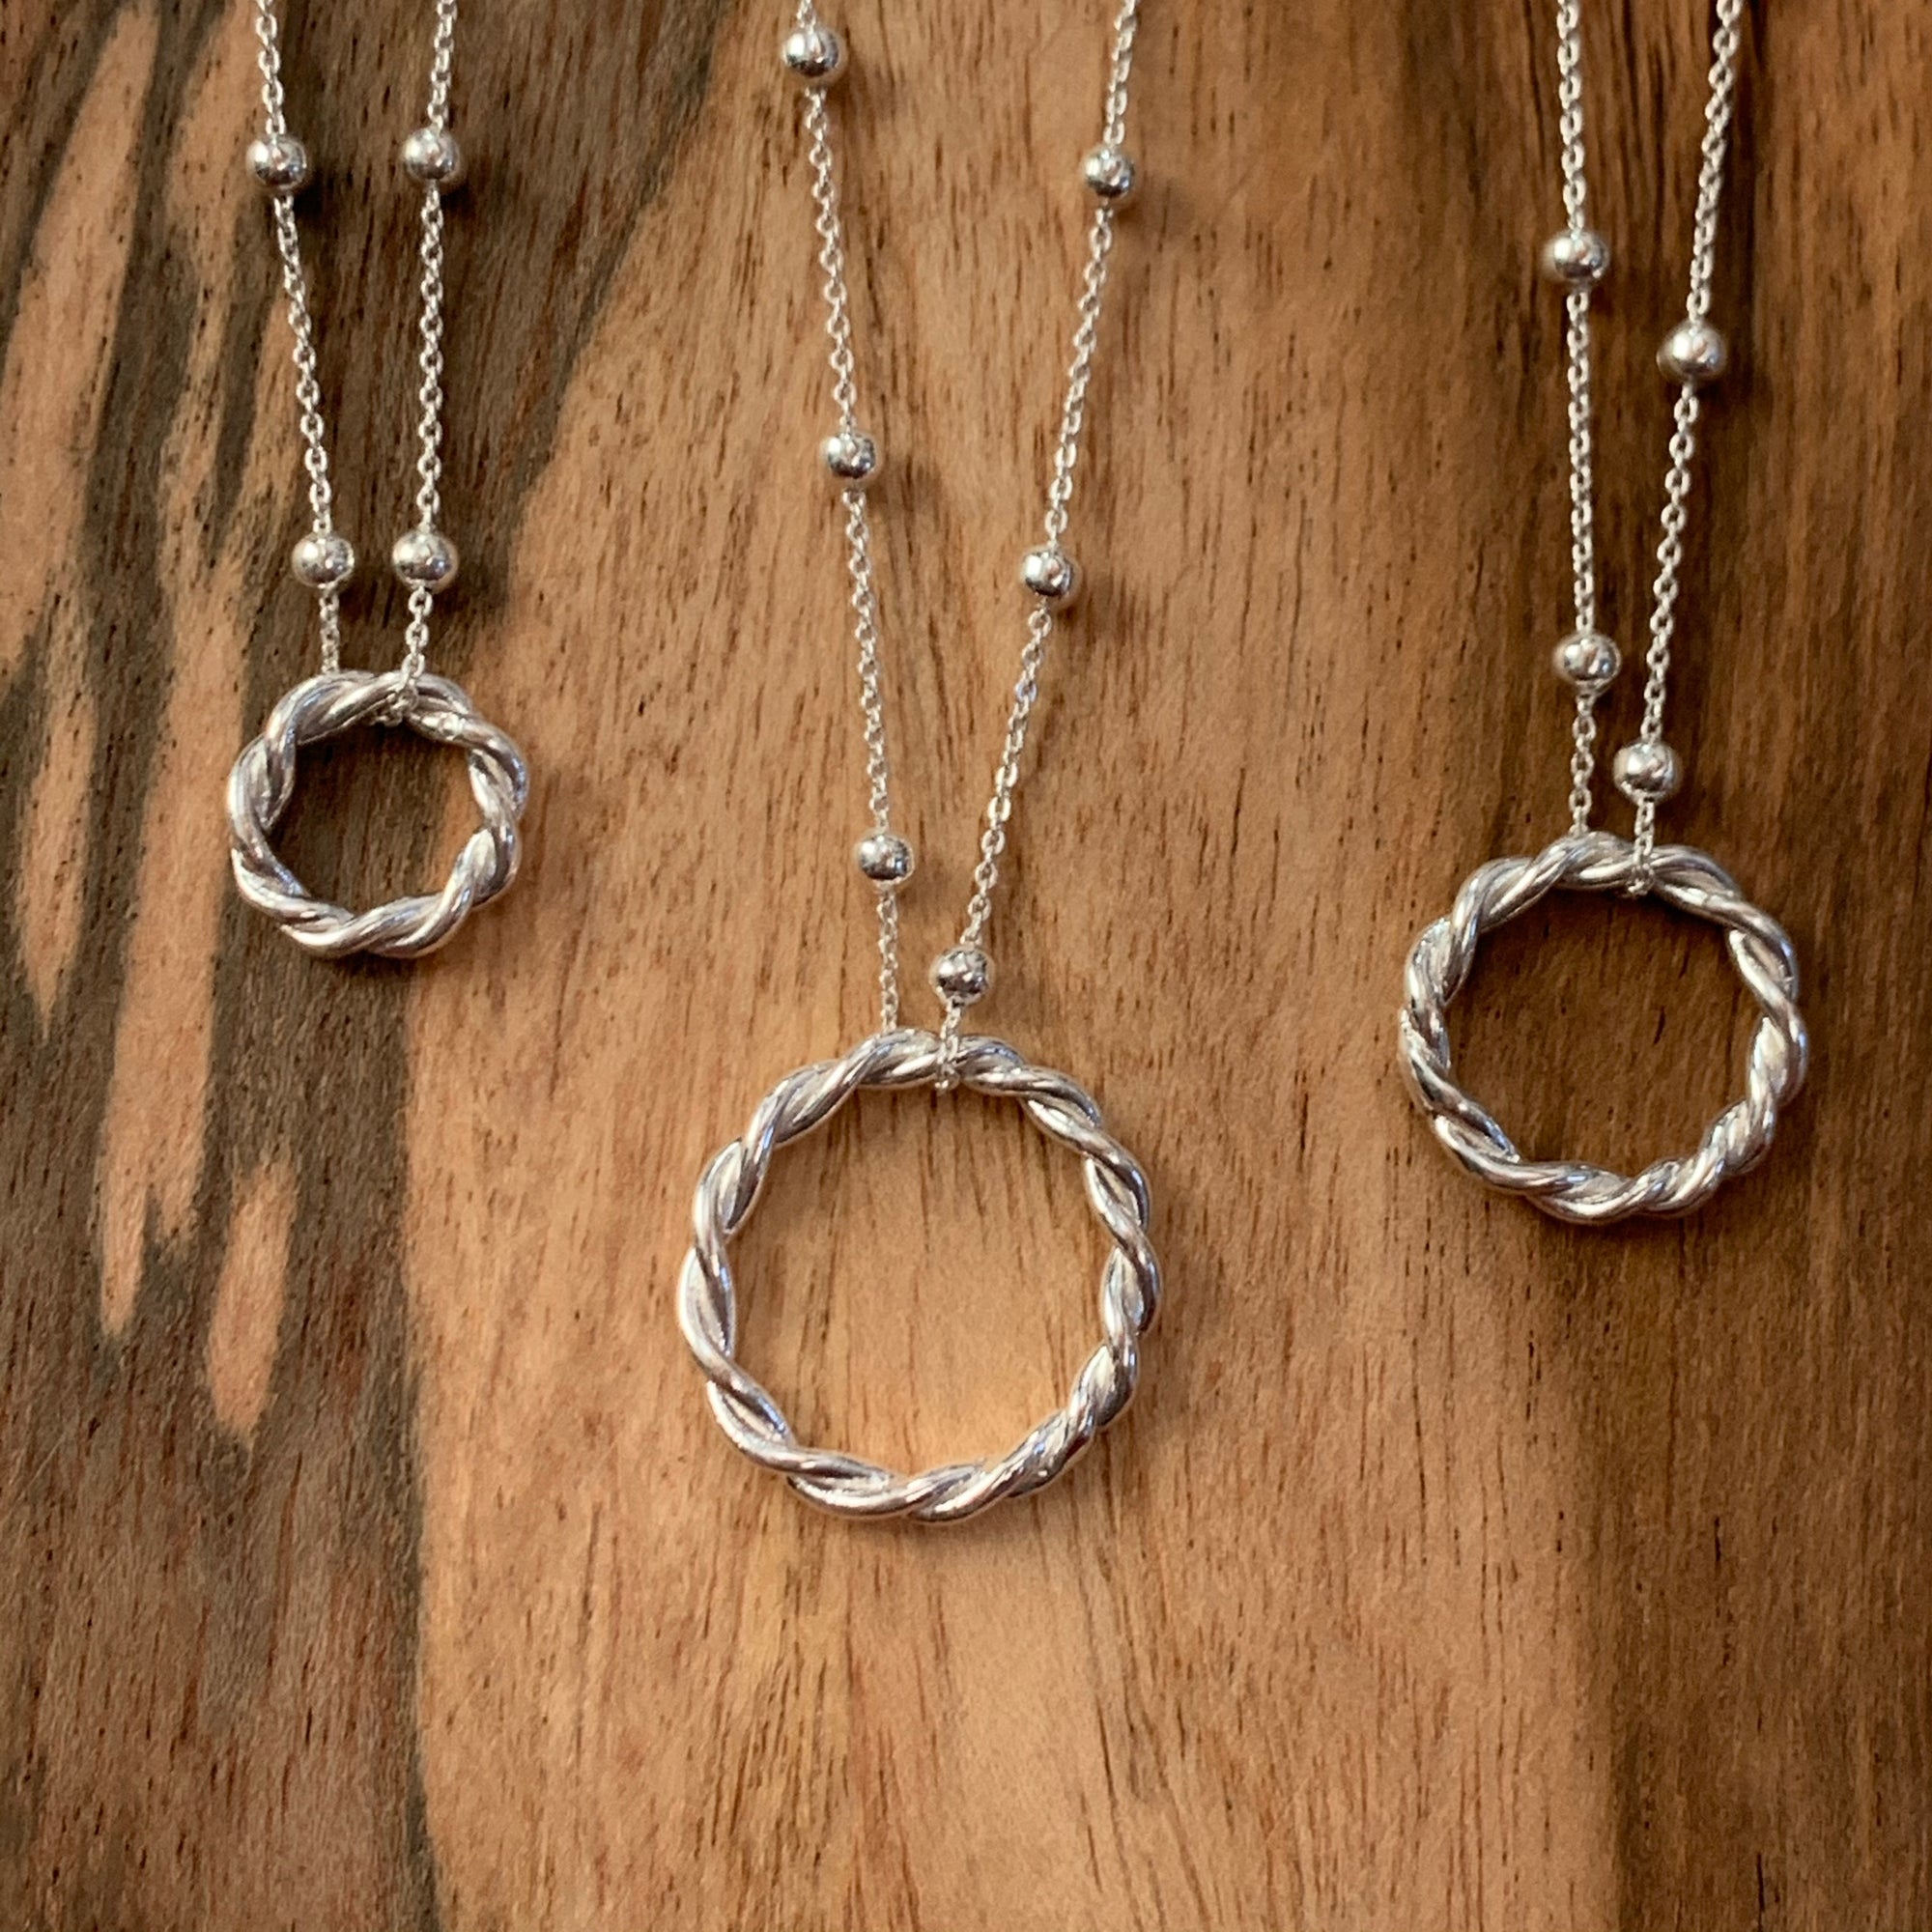 Rope Circle Necklace - Sterling Silver